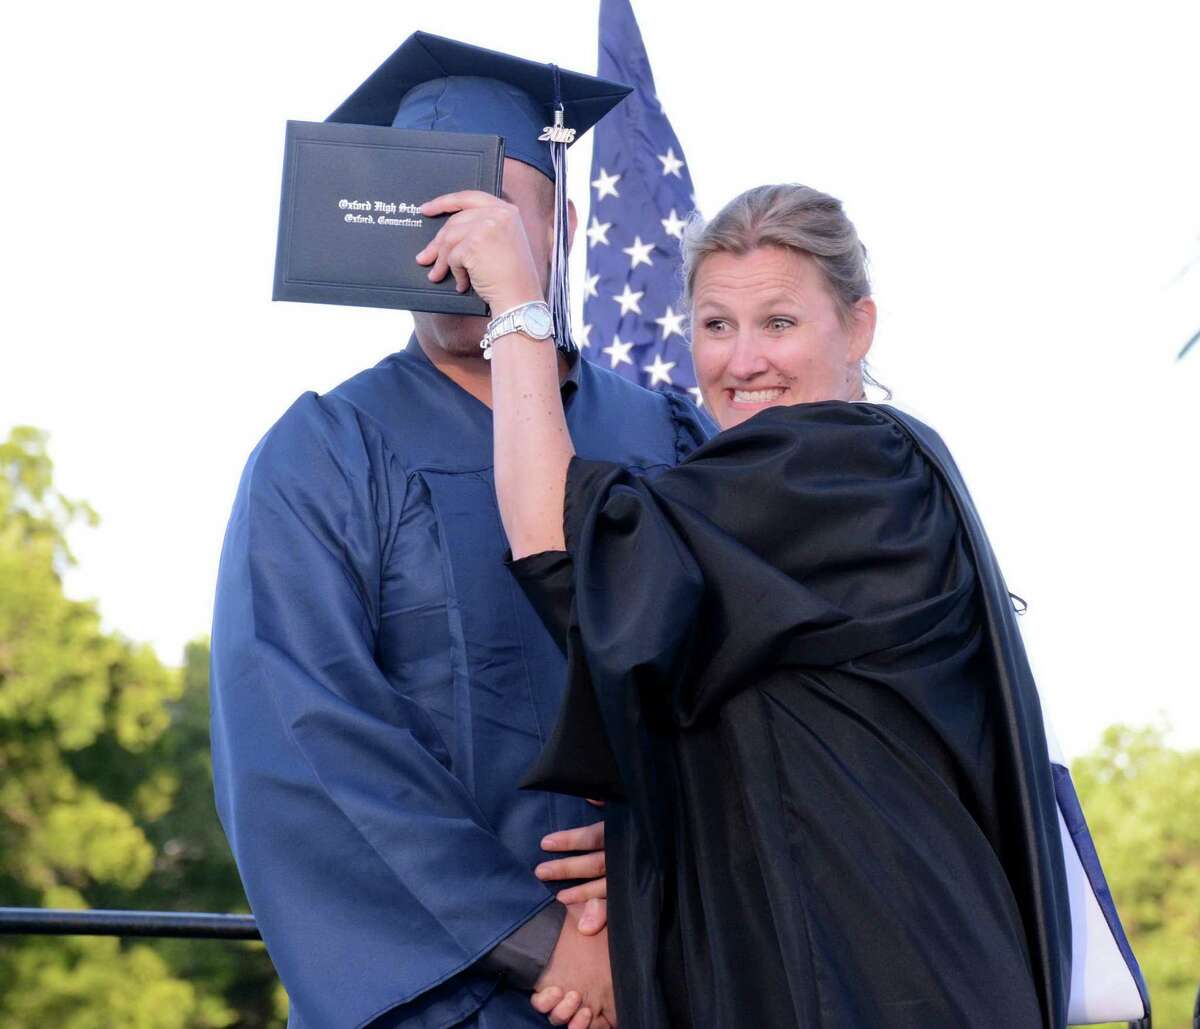 Oxfords Principal, Dorothy Potter, teases graduate Aaron Trelease as he receives his diploma during Oxford High Schools Graduation ceremony in Oxford, Conn. that was held on Friday June 10, 2016.